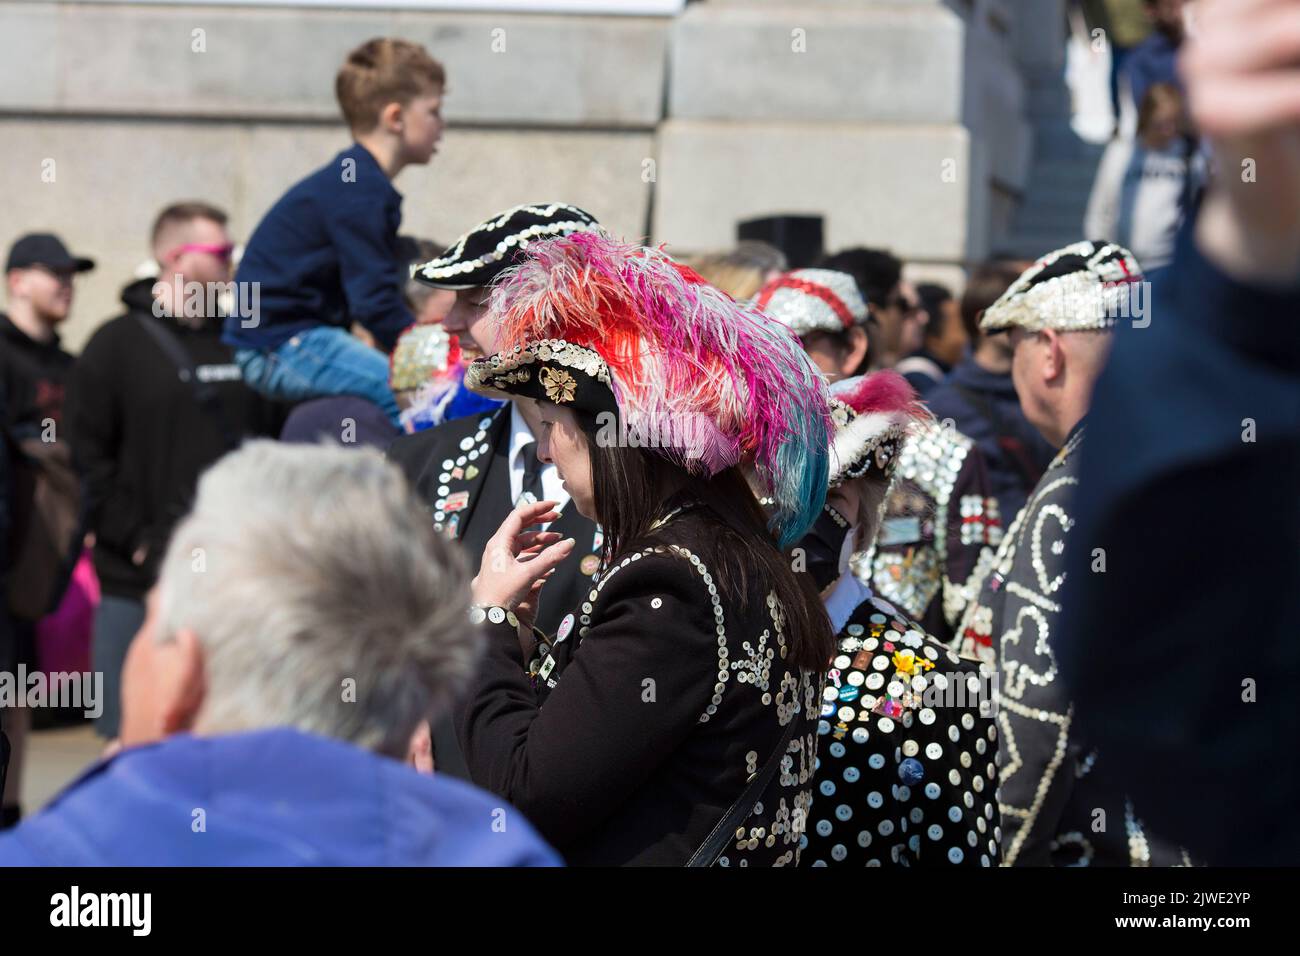 Pearly Kings and Queens are seen as people gather for St George’s Day celebrations in Trafalgar Square, central London. Stock Photo